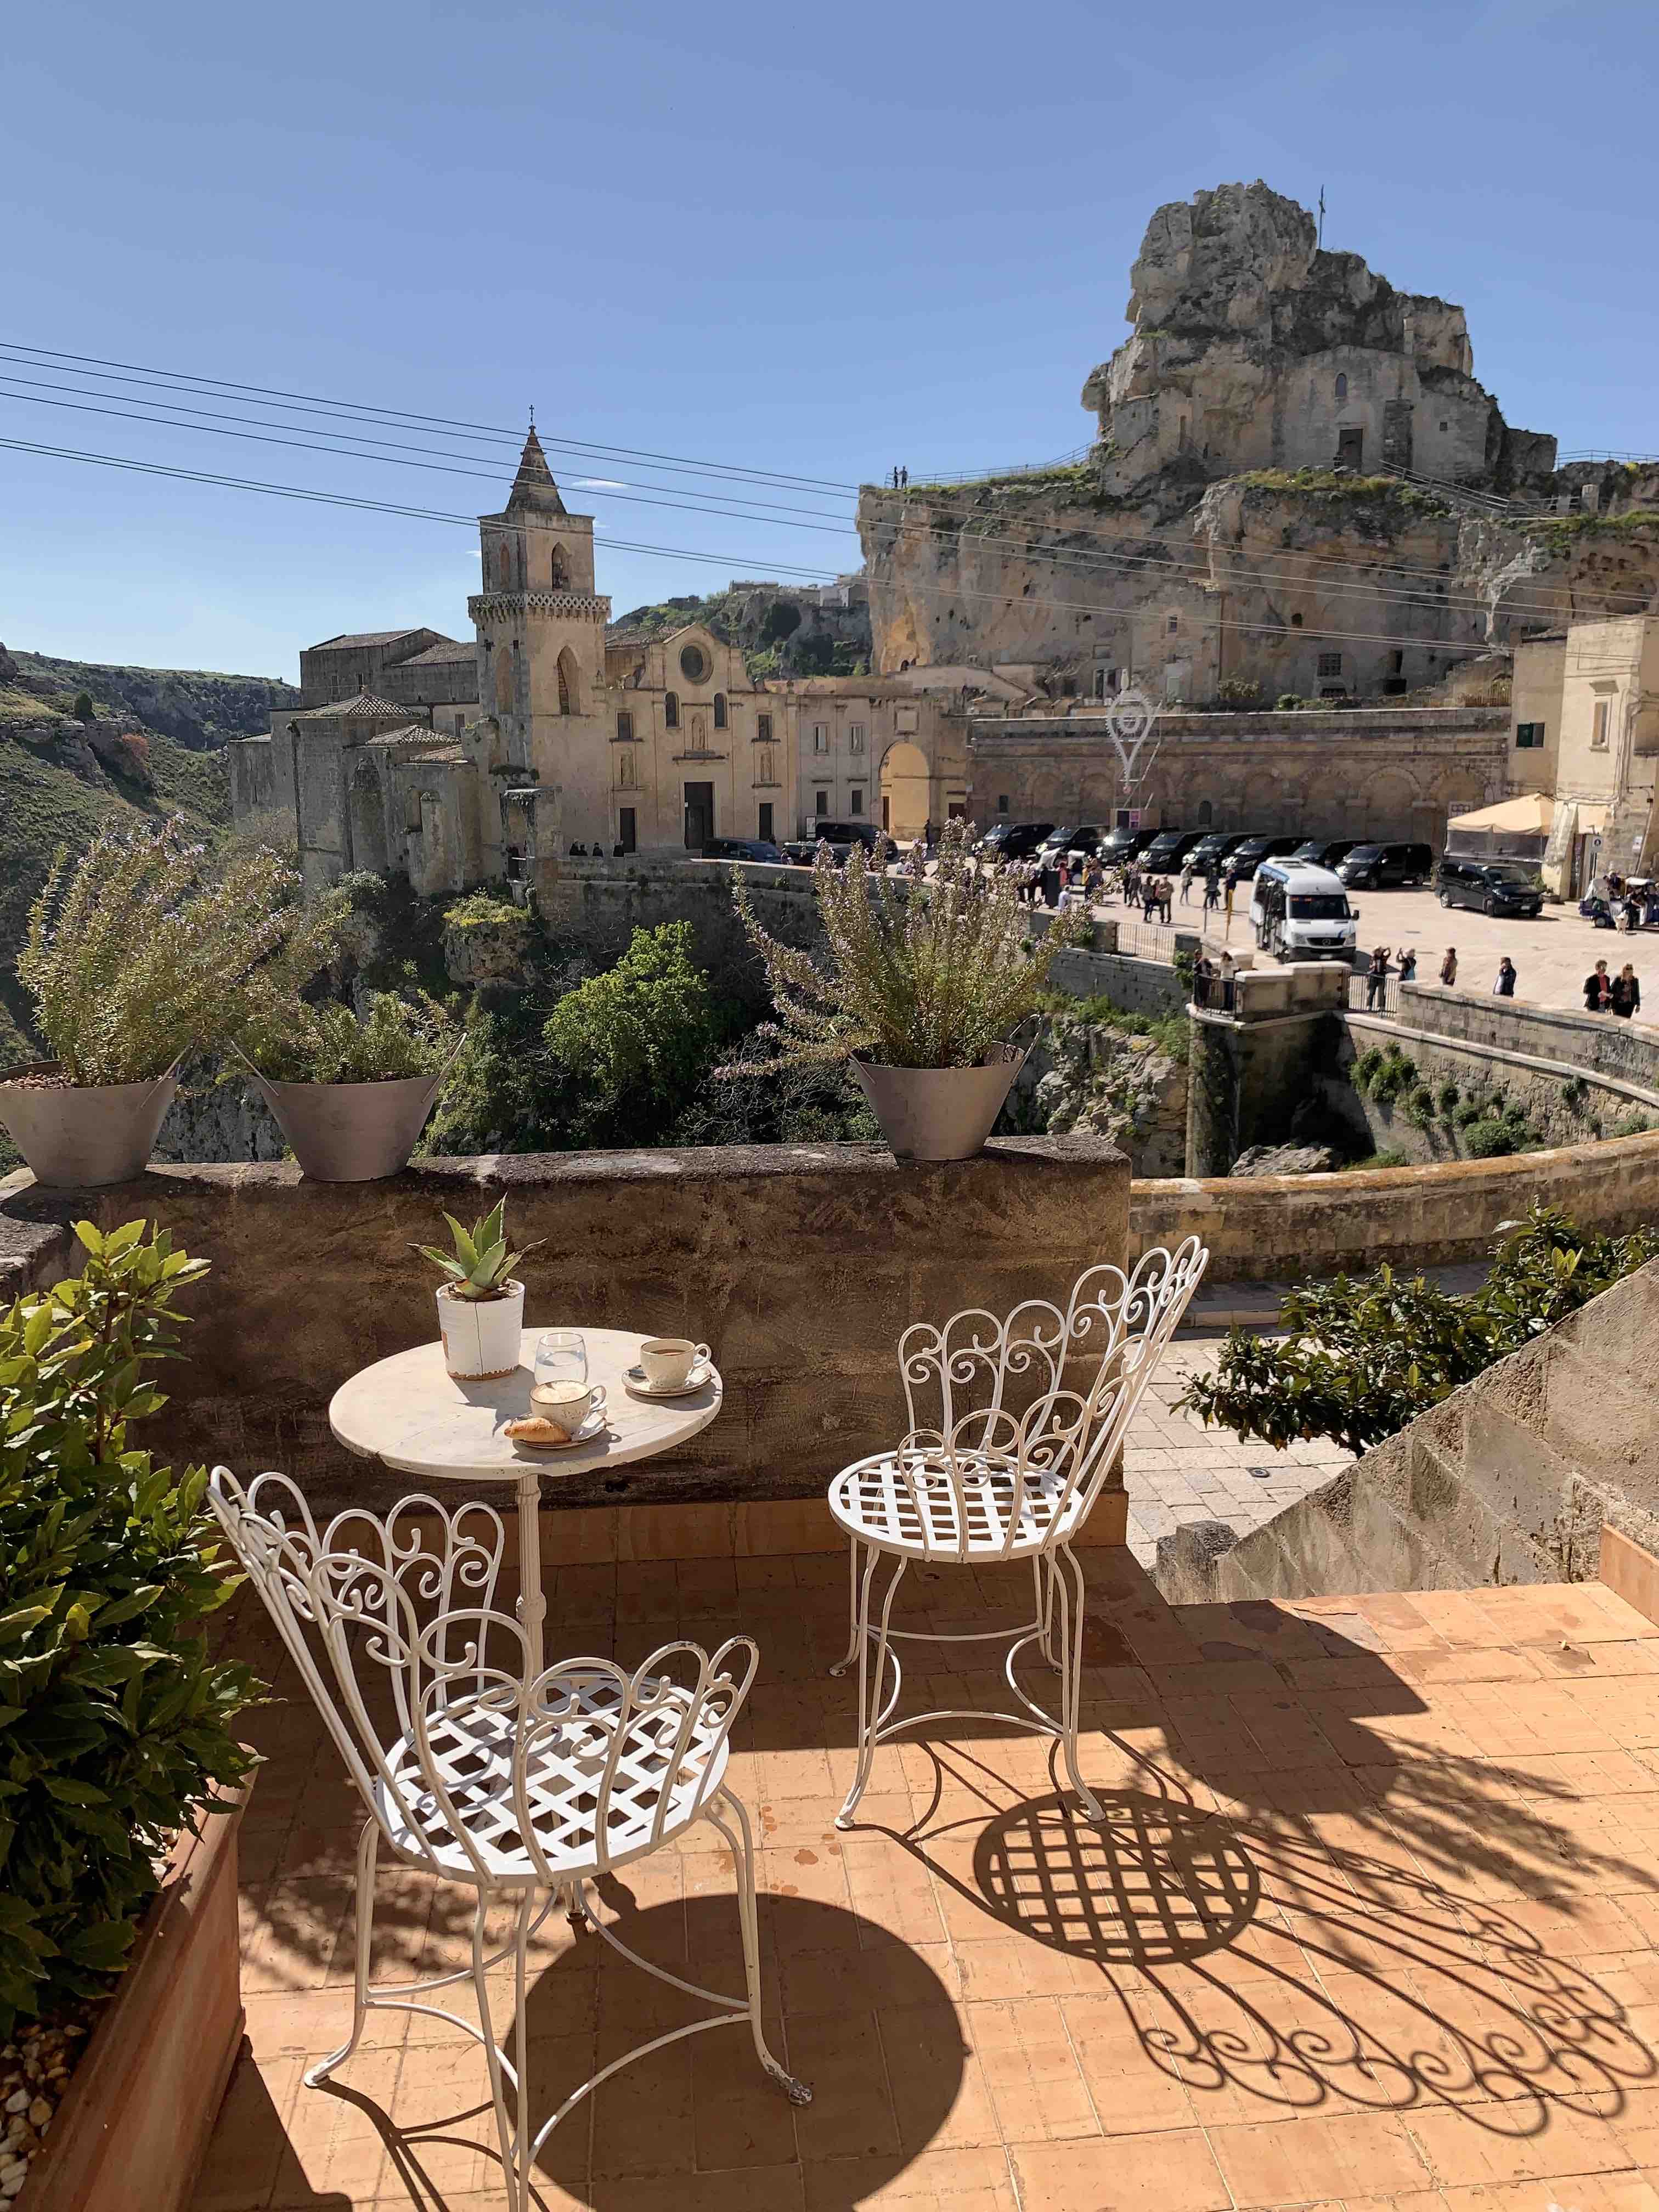 Sant'Angelo Luxury Resort in Matera - has great views and location.